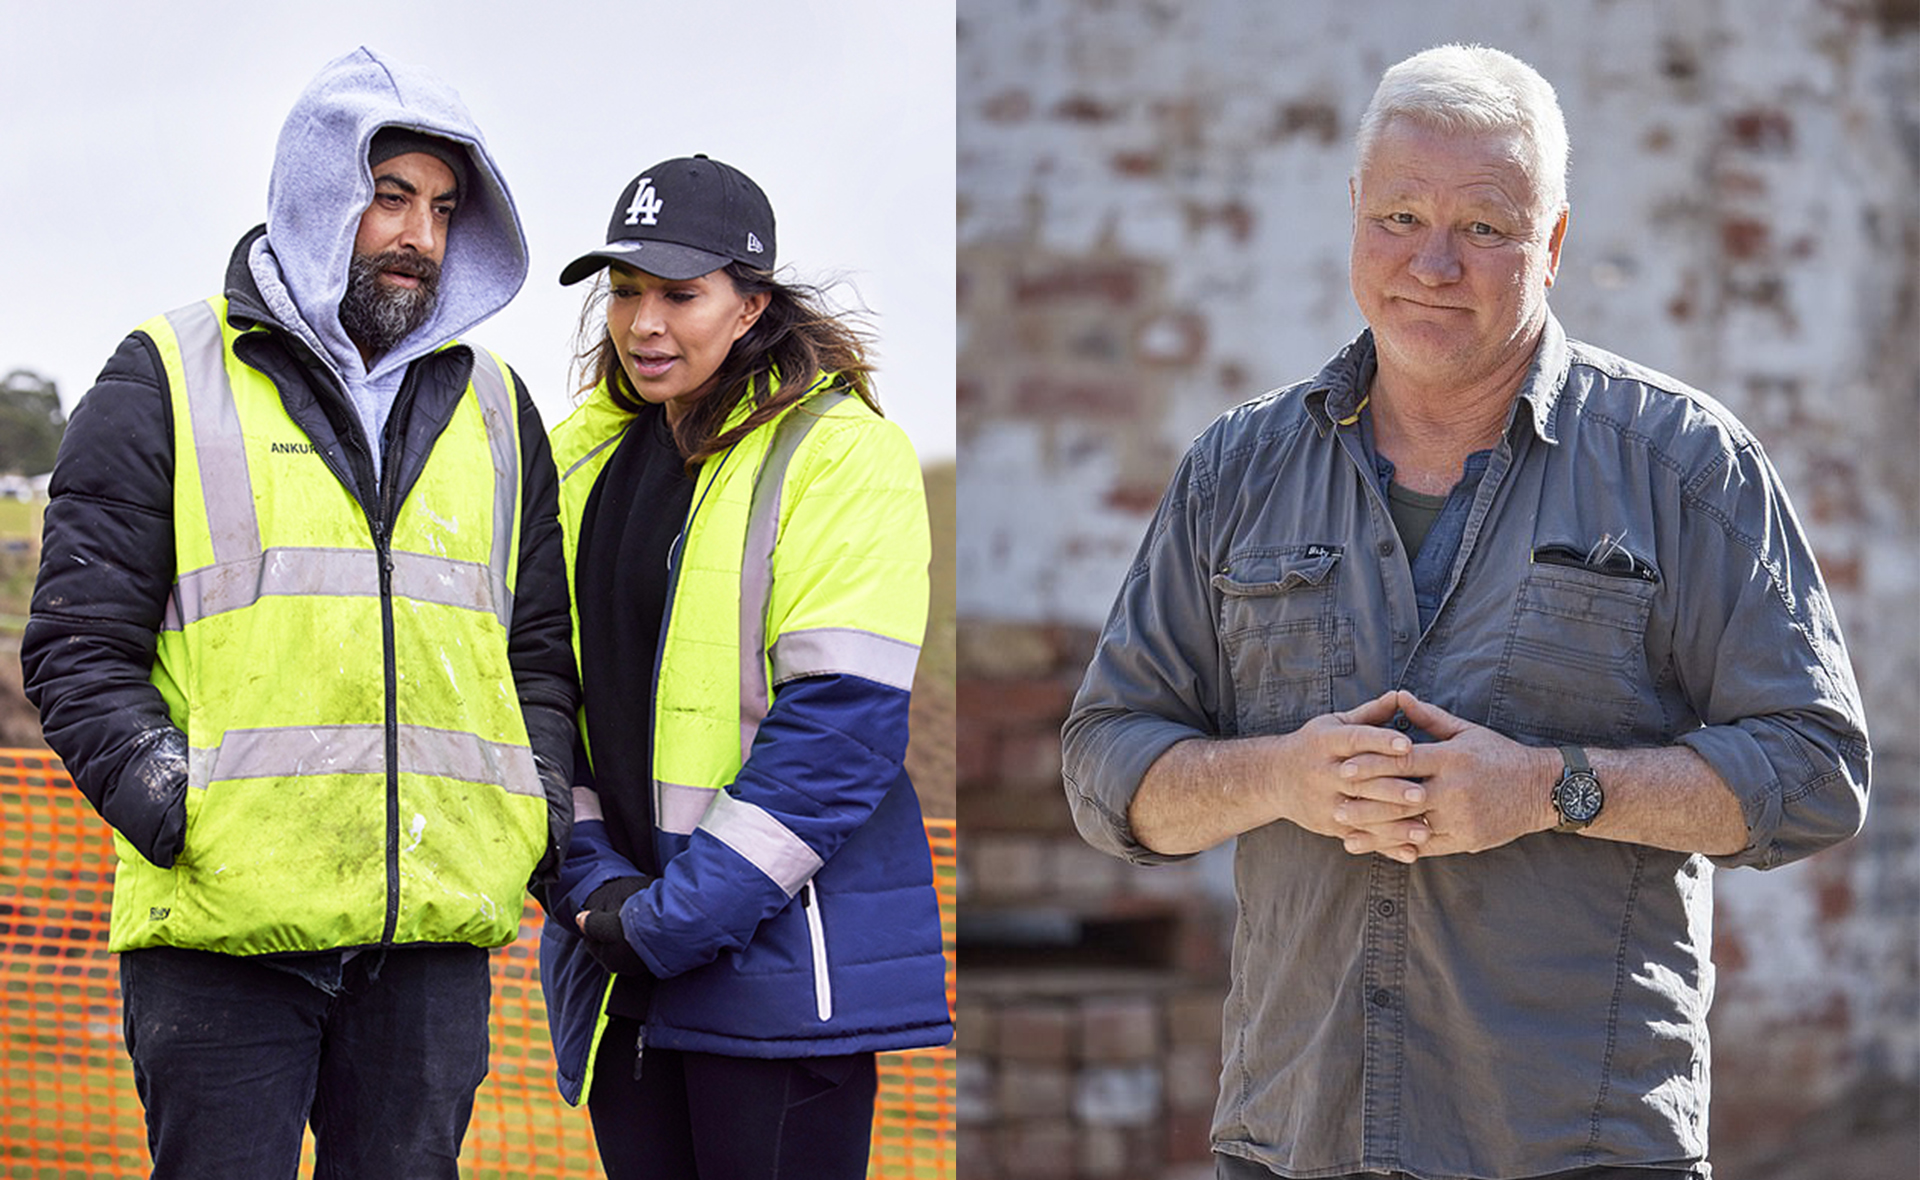 EXCLUSIVE: The Block’s Scott Cam bans Sharon and Ankur from hiring more tradies without his approval